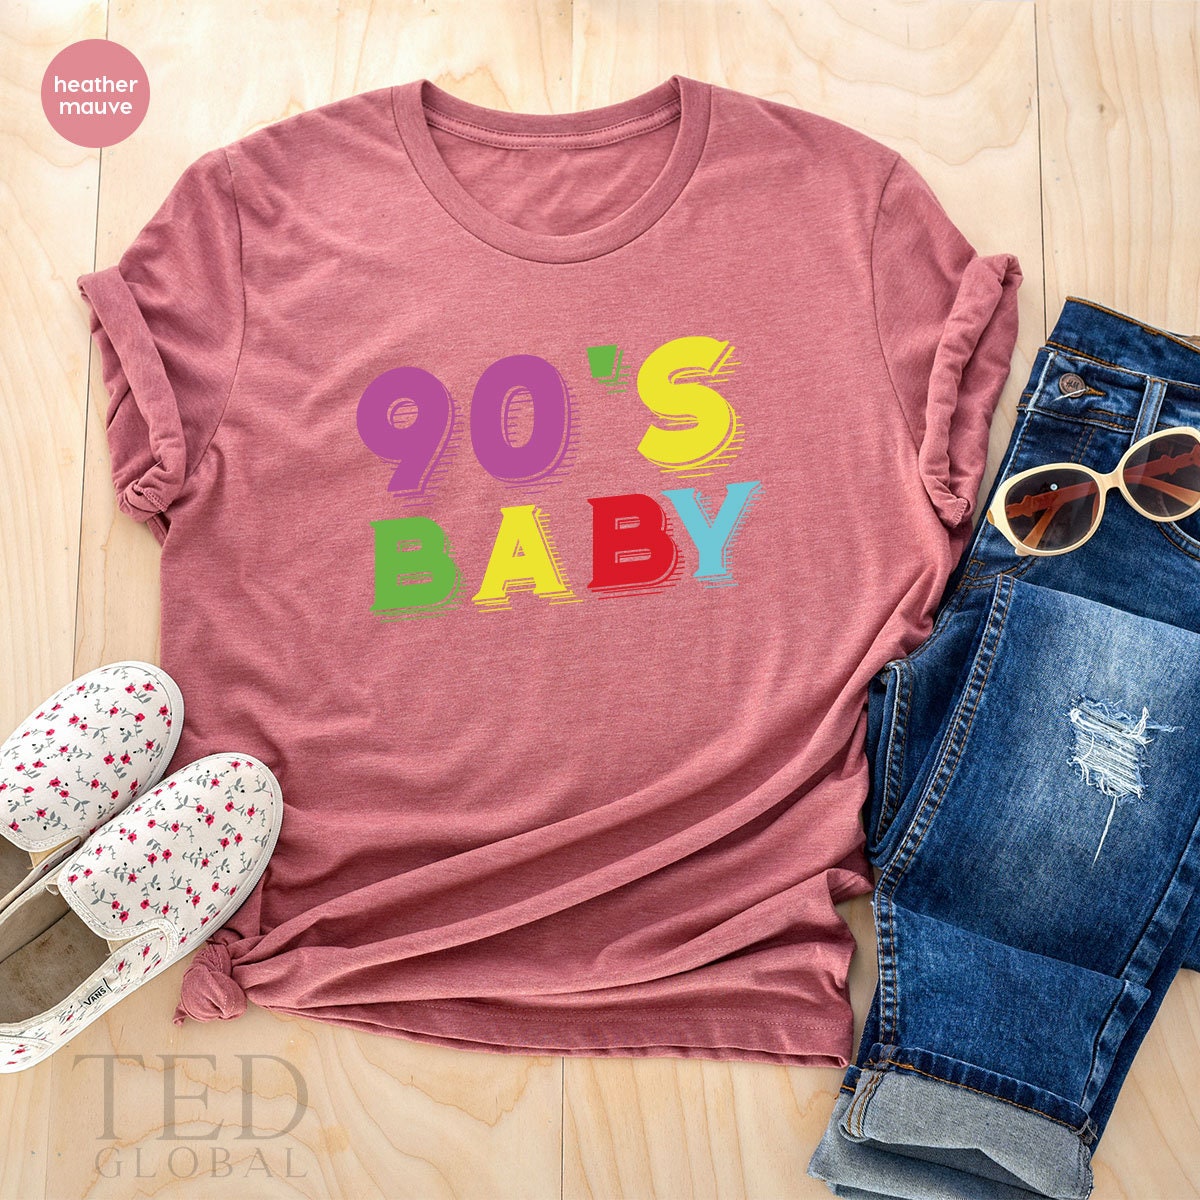 Cute 90's Baby T-Shirt, Vintage TShirt, Color Revel 90's Baby Shirts, Vintage 90's Baby Shirt, 90's Baby Retro TShirt, Gift 90's Birthday - Fastdeliverytees.com